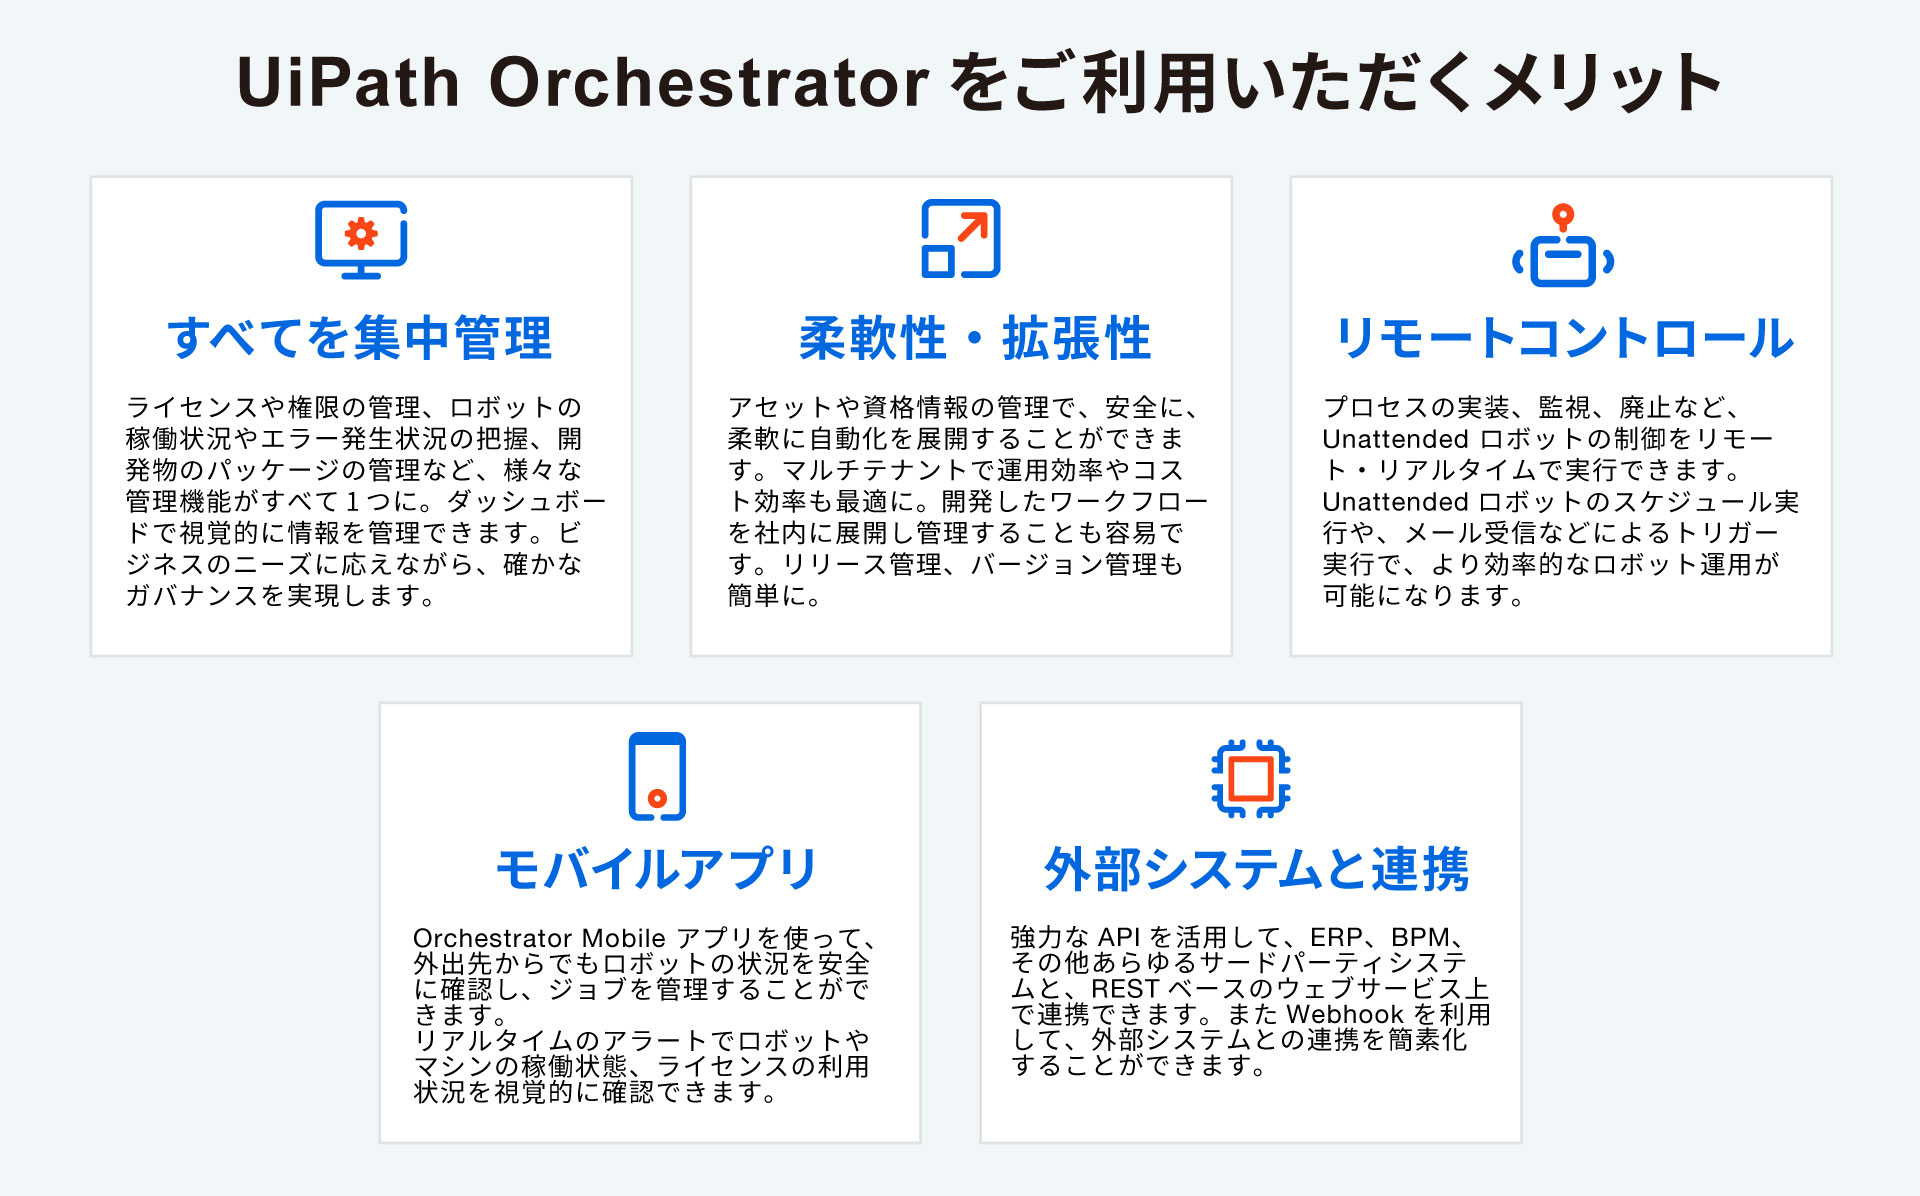 Orchestrator-5-benefits